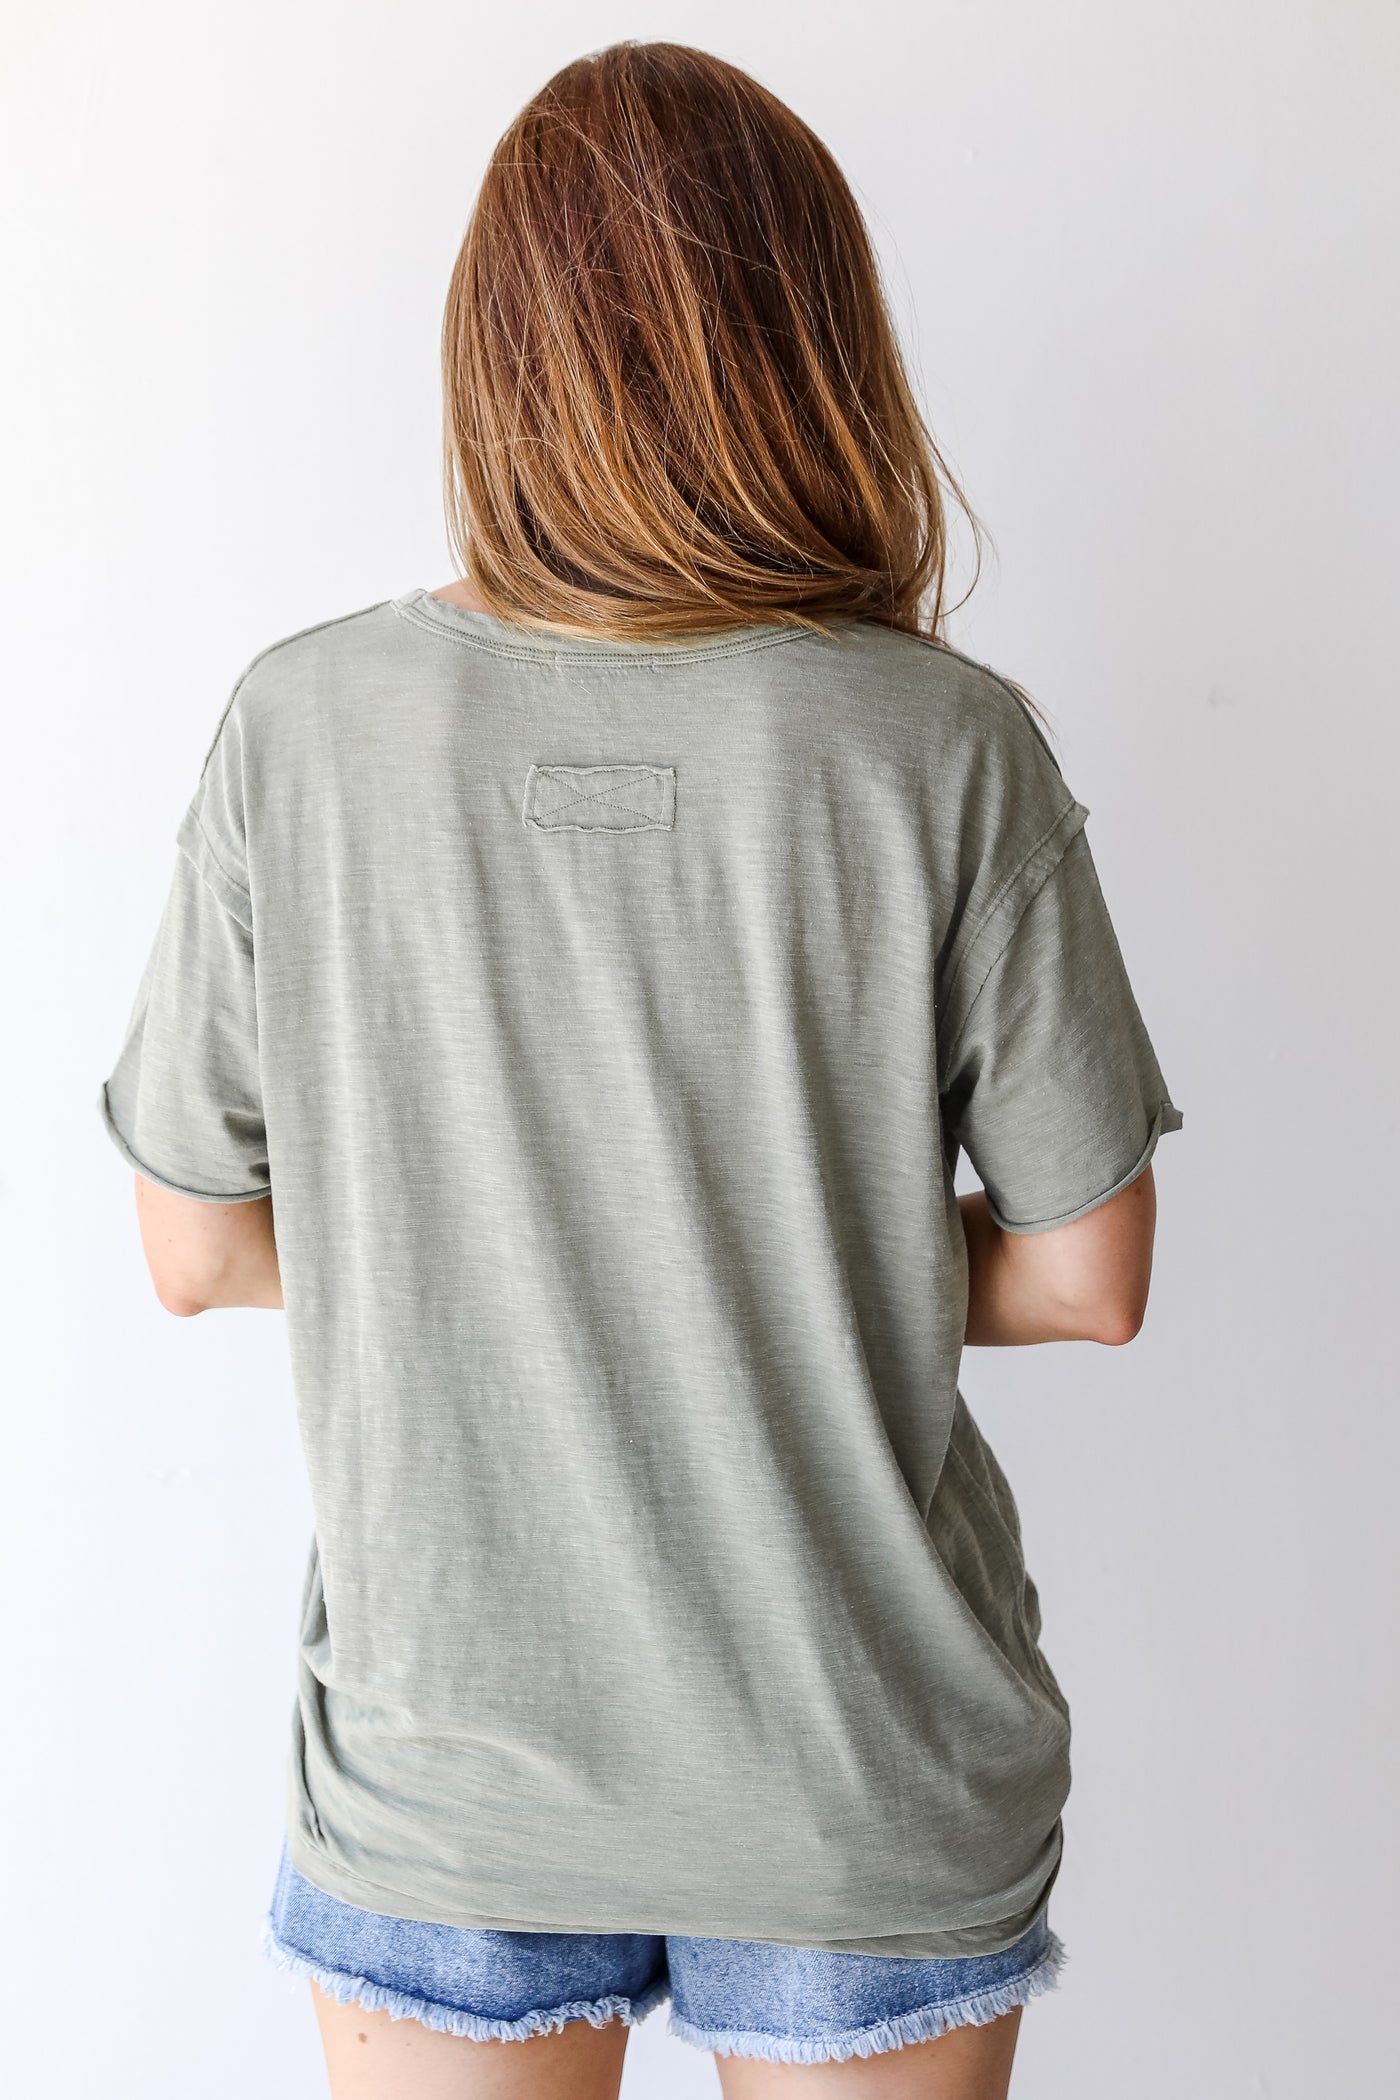 Tee in olive back view